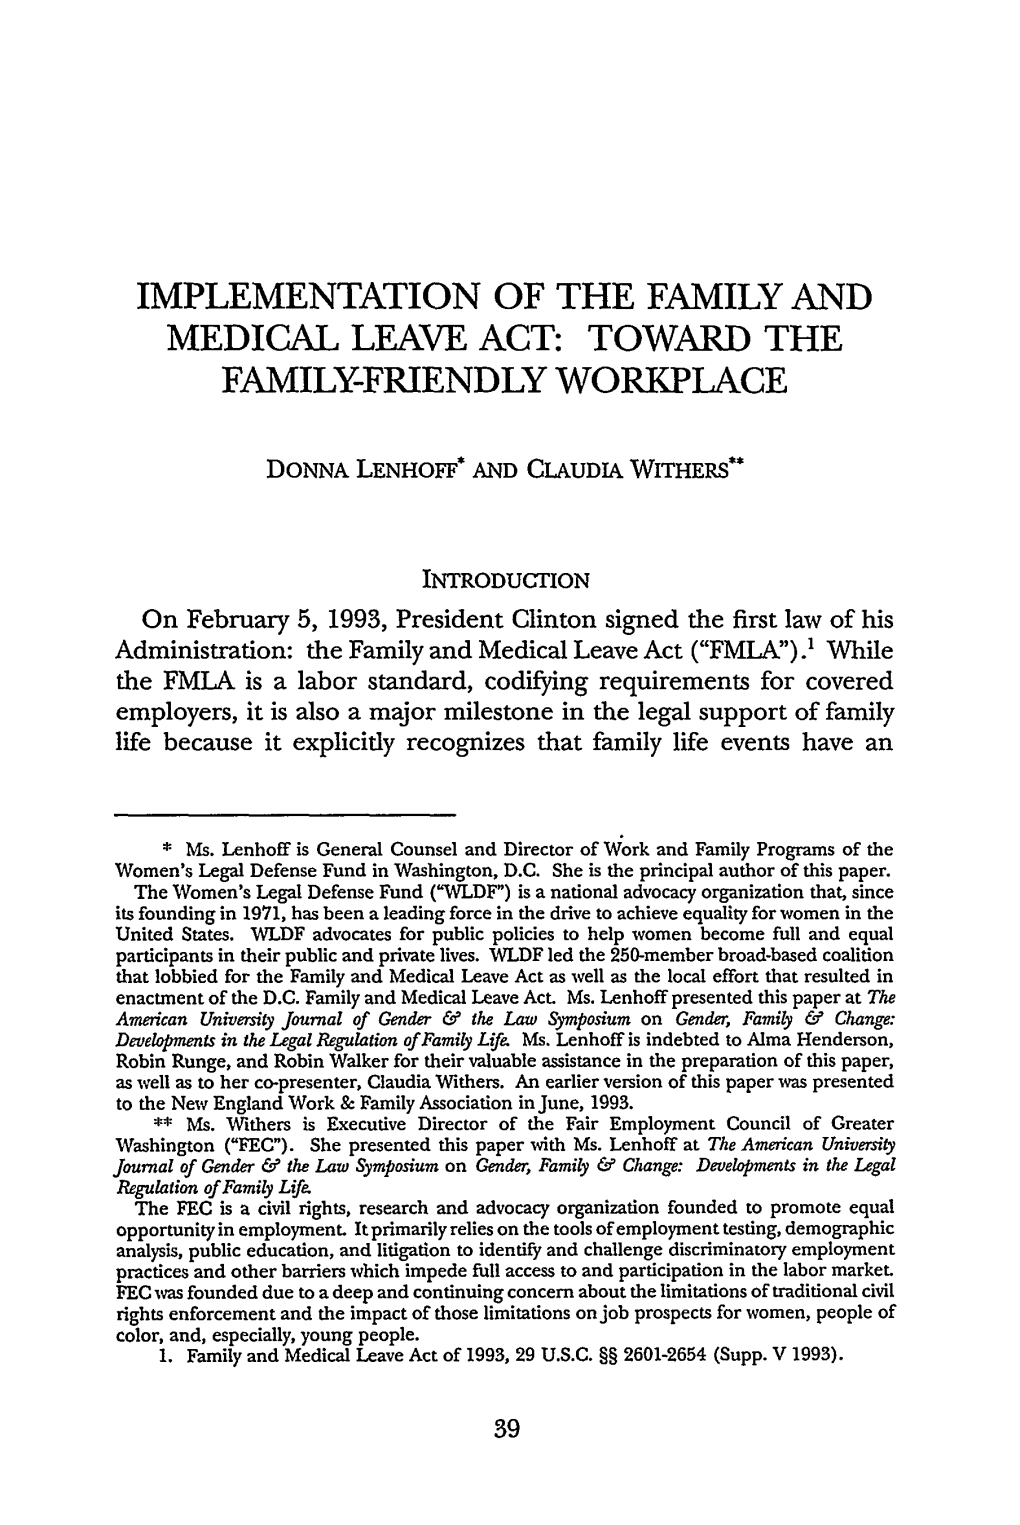 Implementation of the Family and Medical Leave Act: Toward the Family-Friendly Workplace